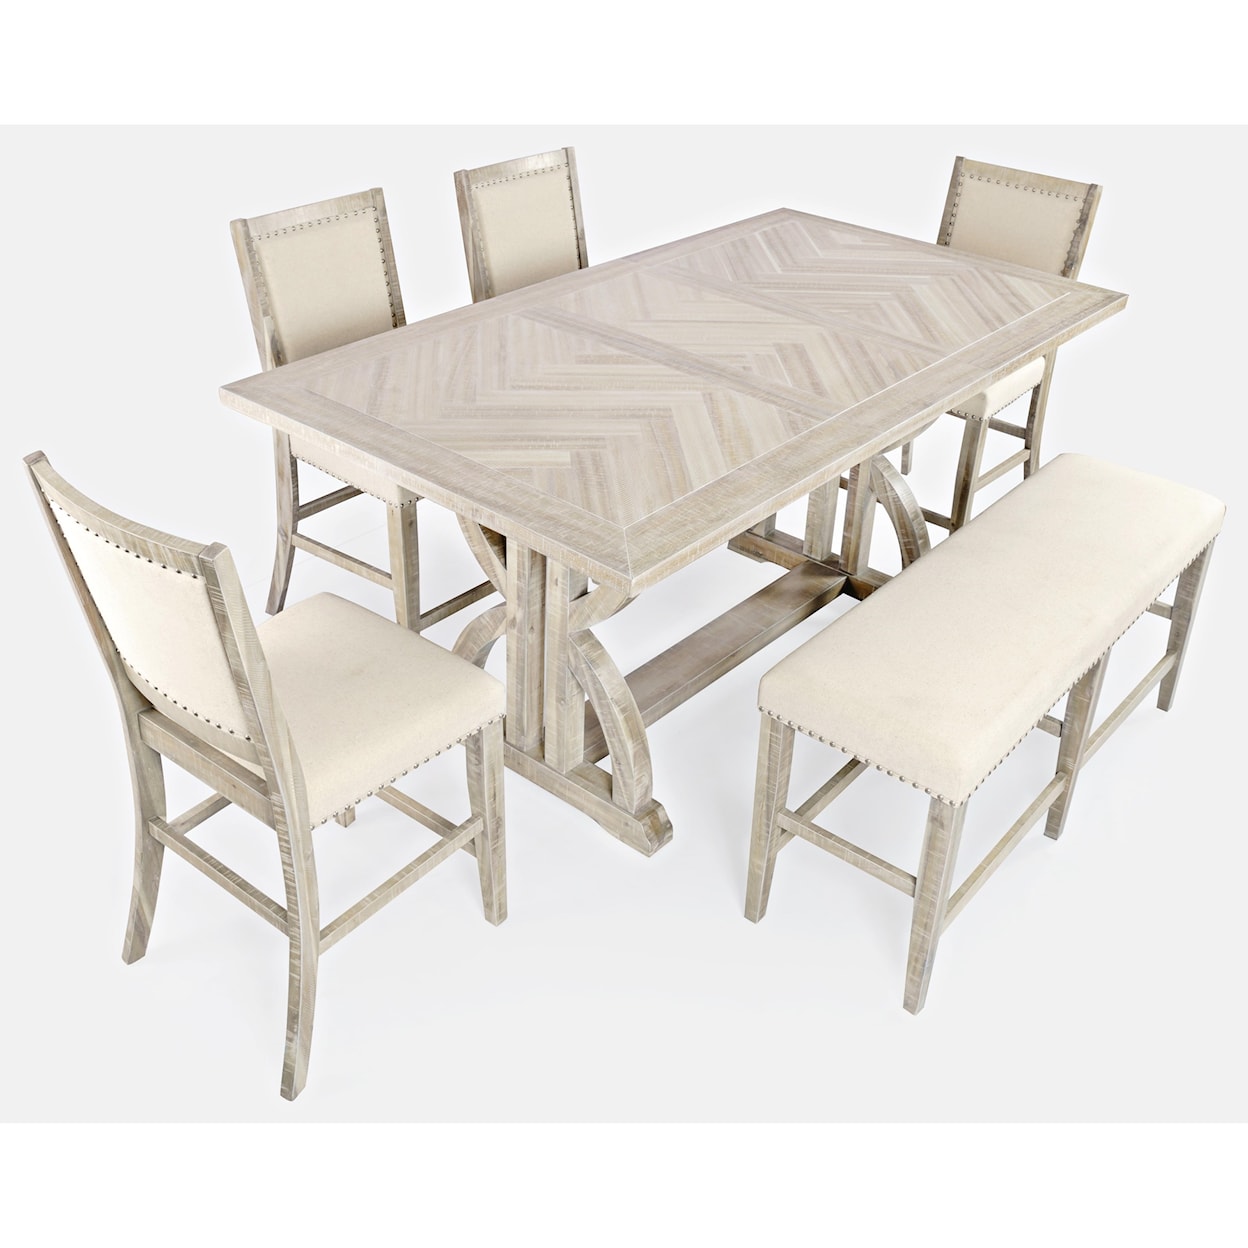 Jofran Fairview 6pc Dining Room Group